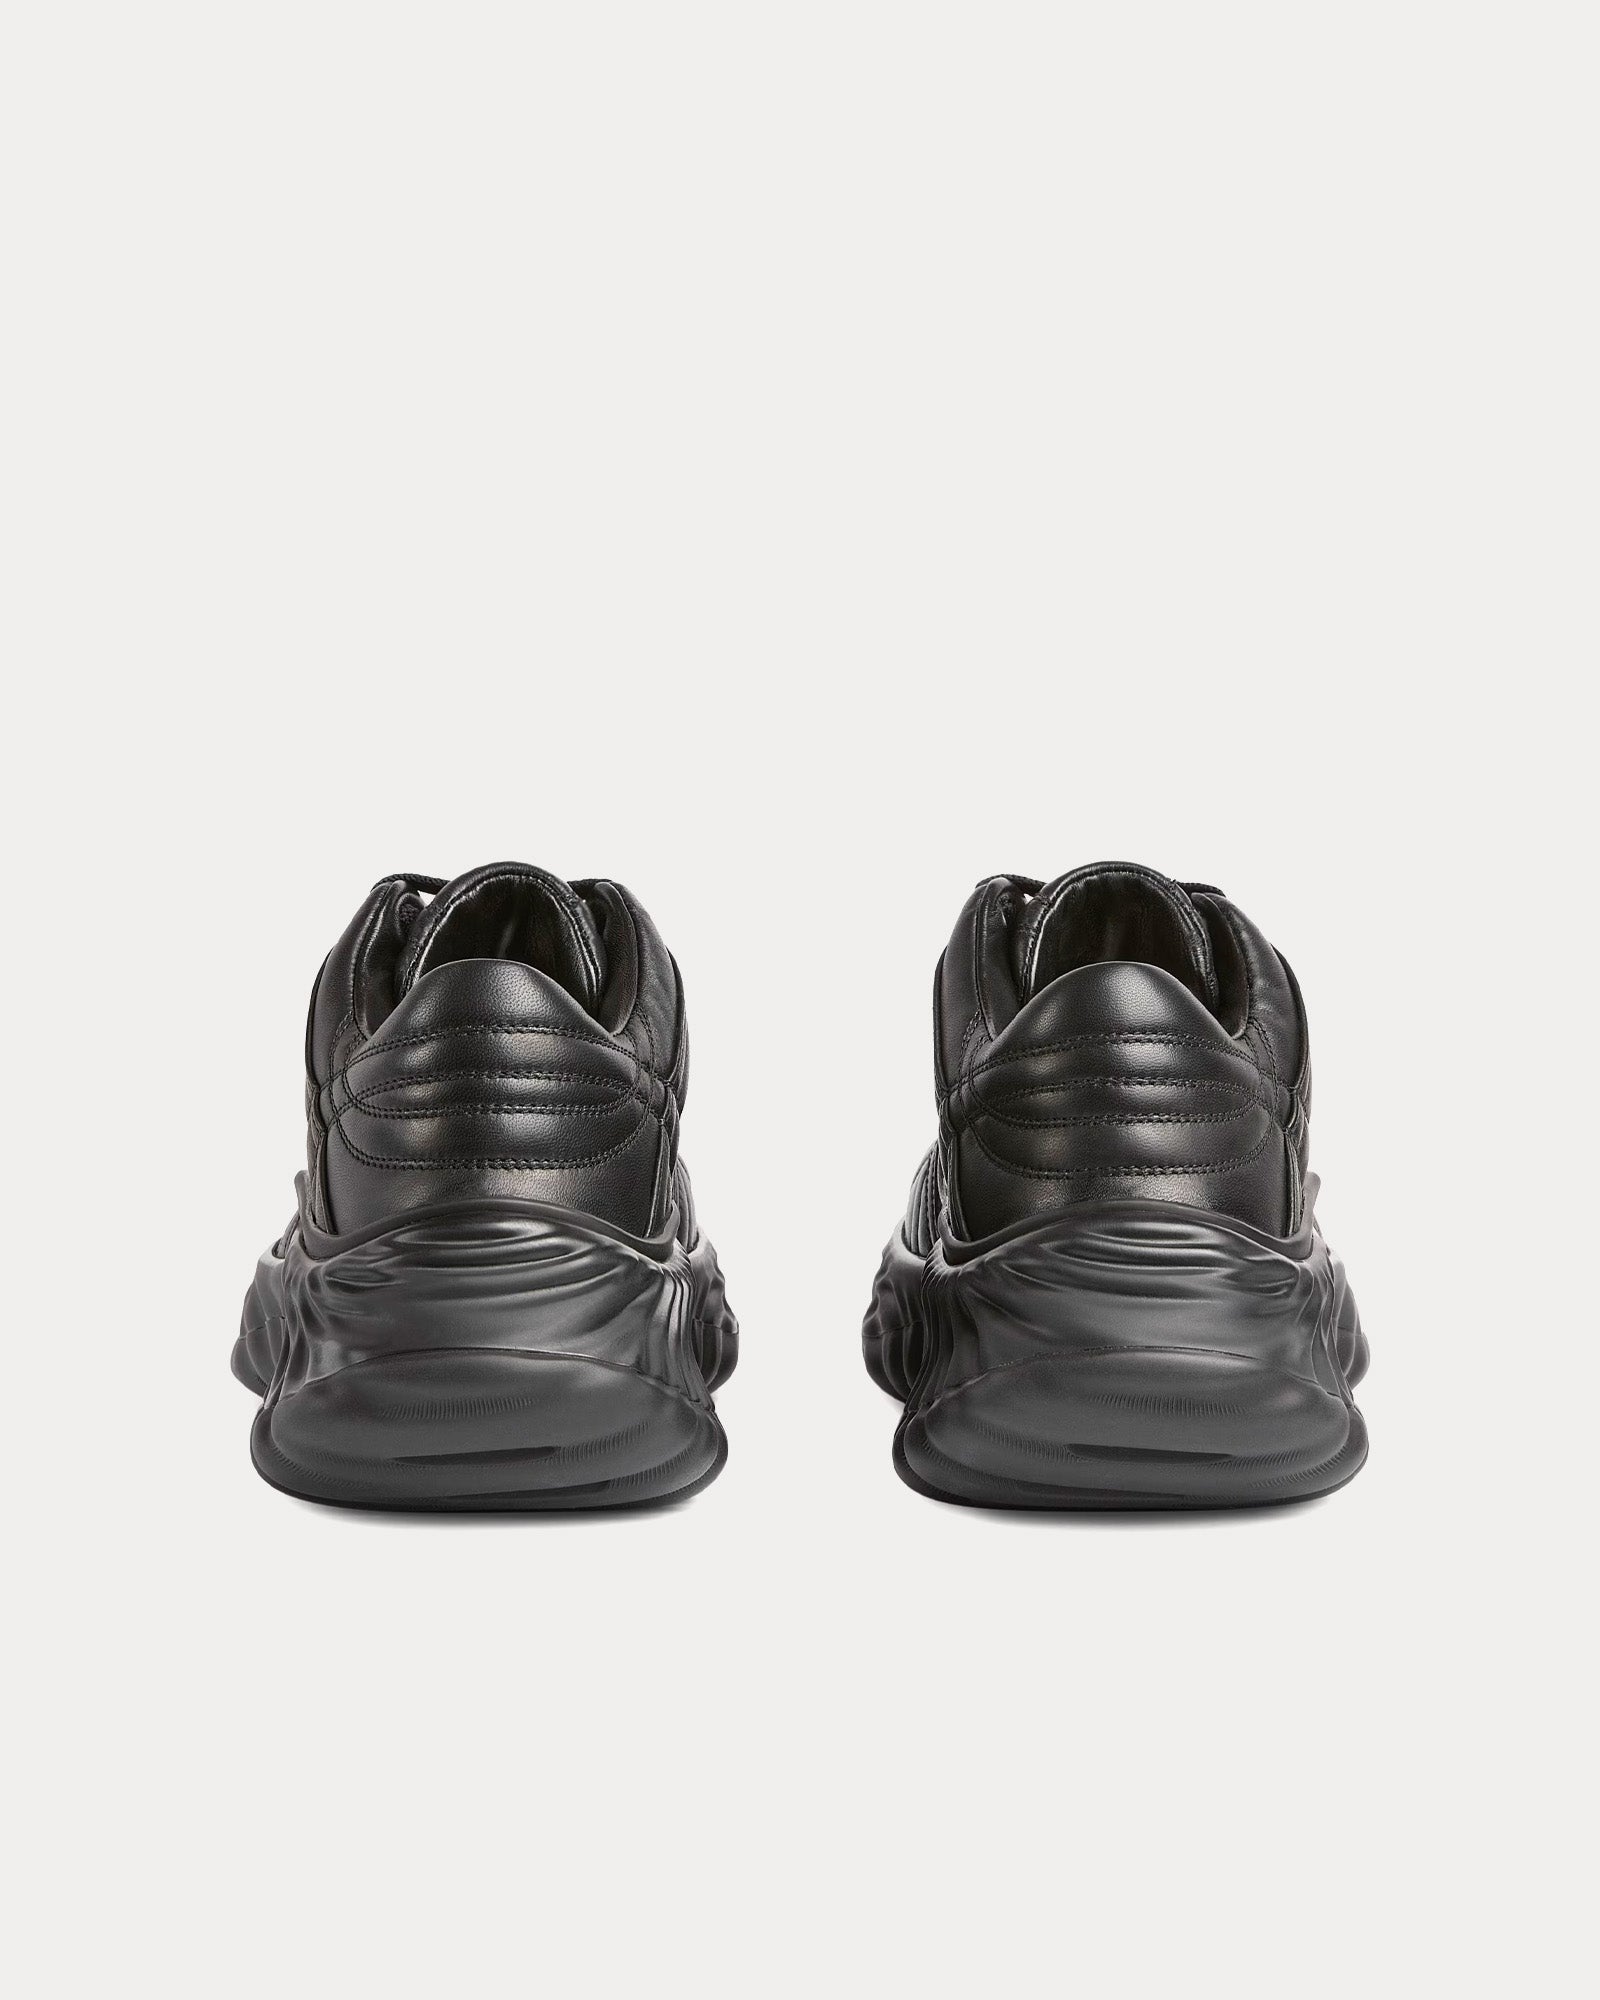 Gucci - Interlocking G Leather Black Low Top Sneakers